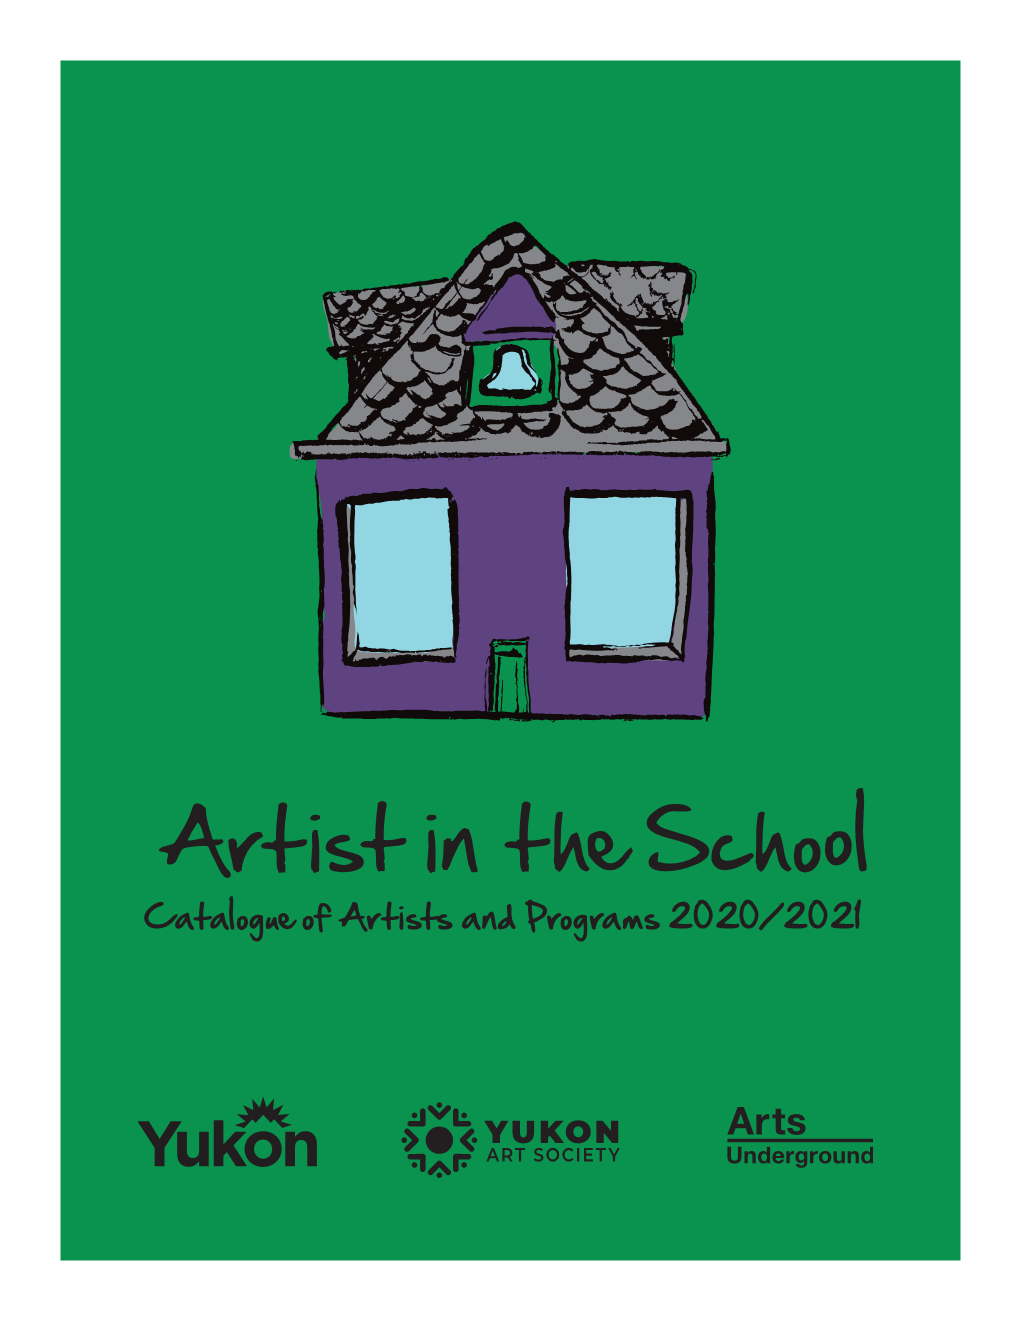 Catalogue of Artists and Programs 2020/2021